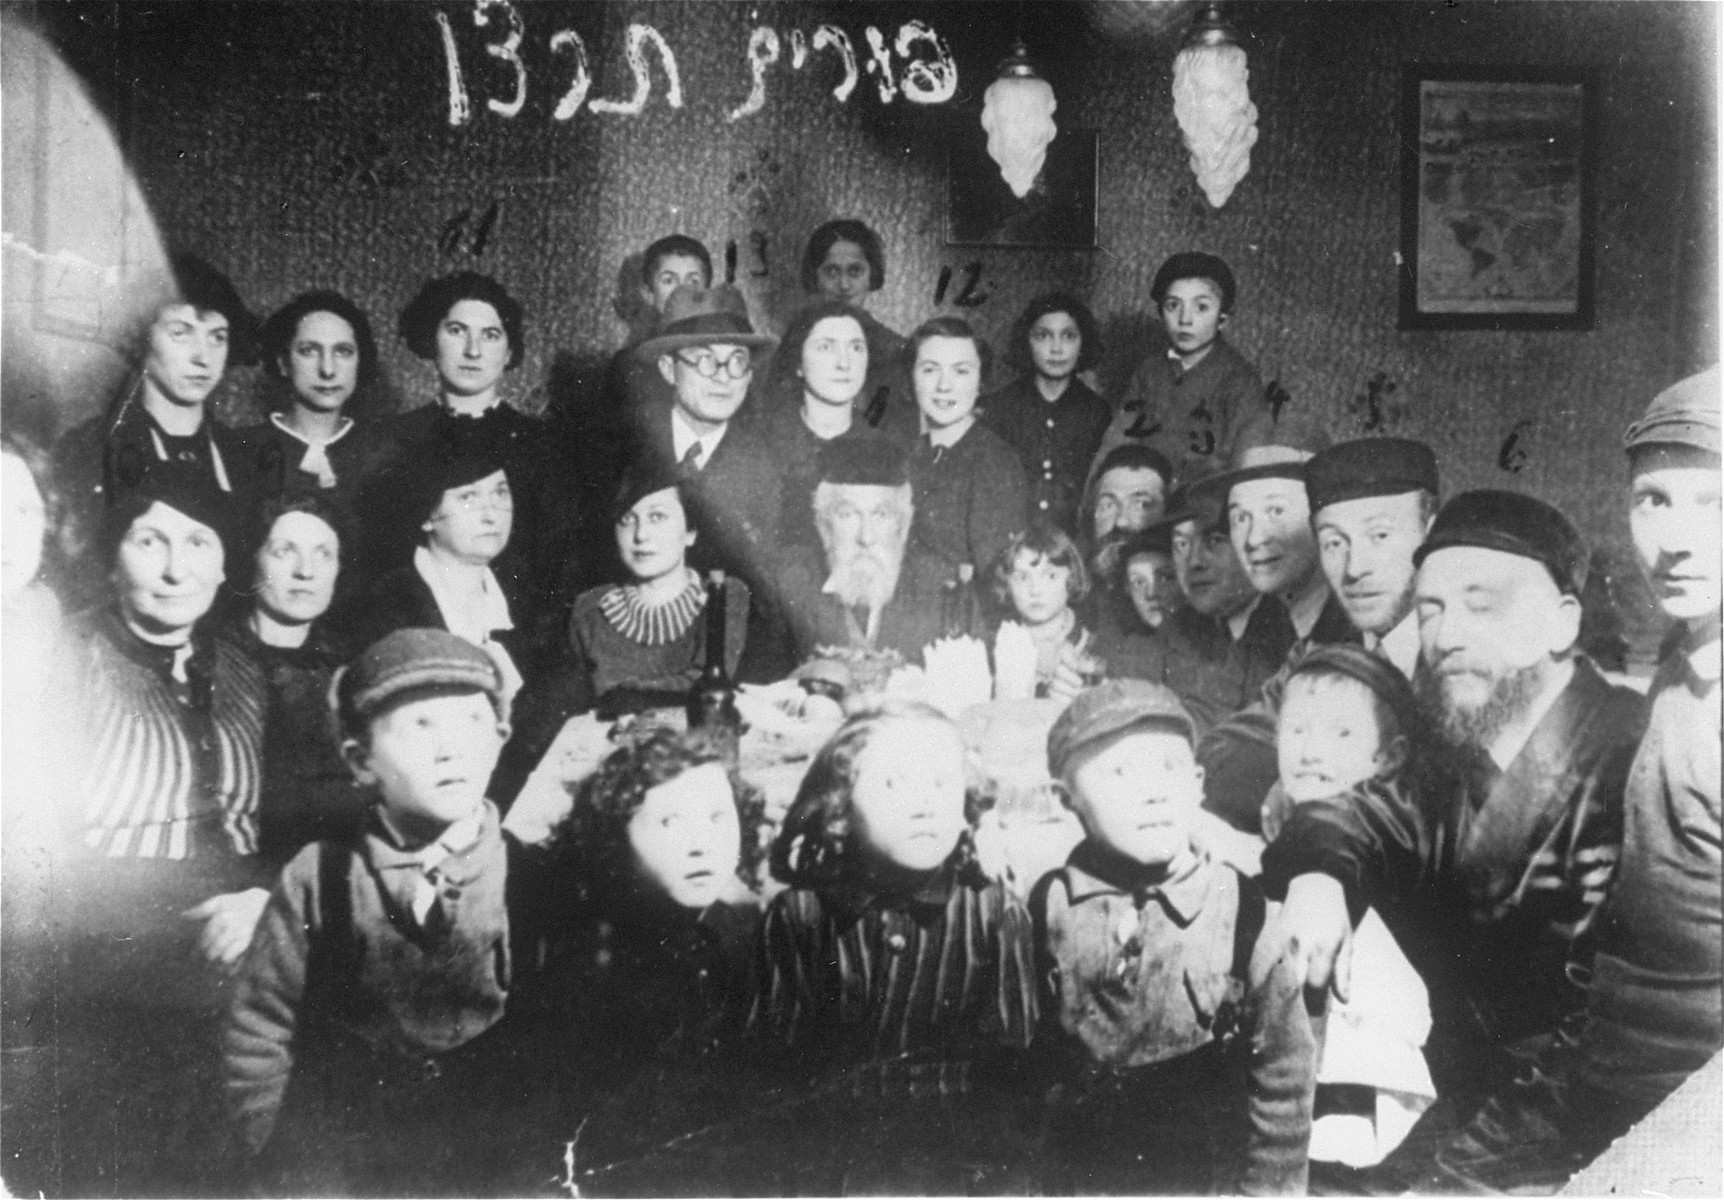 Members of the extended Rosental Vigotska family attend a family celebration on Purim. 

Among those pictured are Yona Wygocka Dickmann and Hajr Naselewicz Chume, two of the three members of the extended family who survived the war.